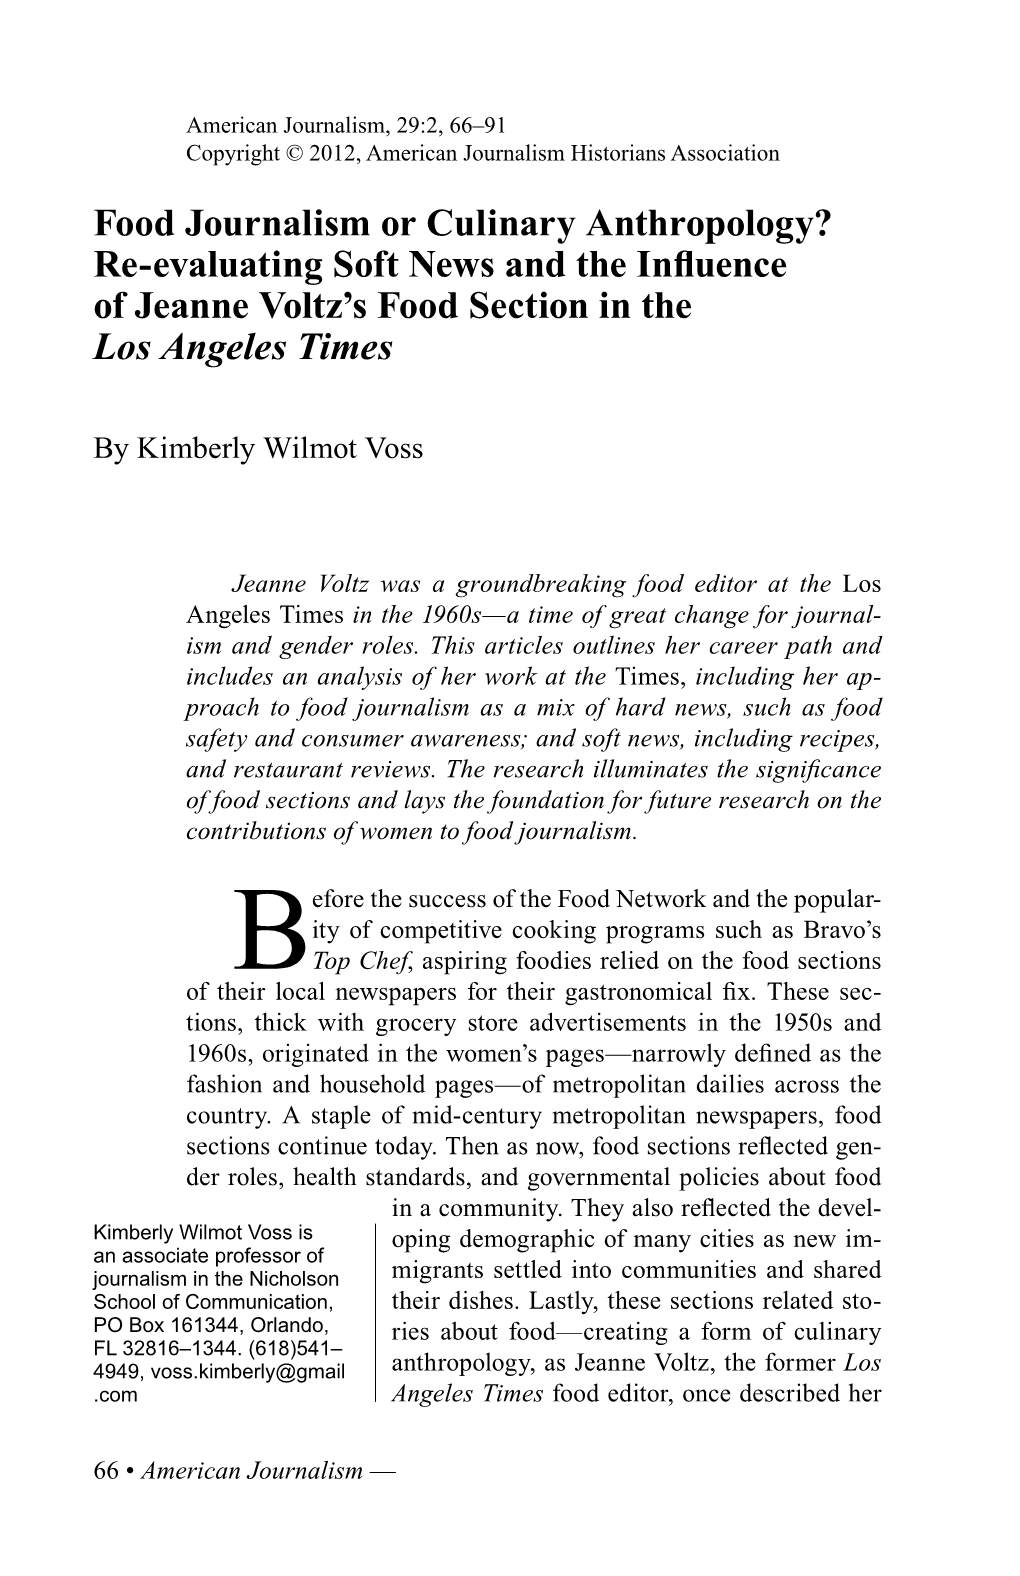 Food Journalism Or Culinary Anthropology? Re- Evaluating Soft News and the Influence of Jeanne Voltz's Food Section in the L